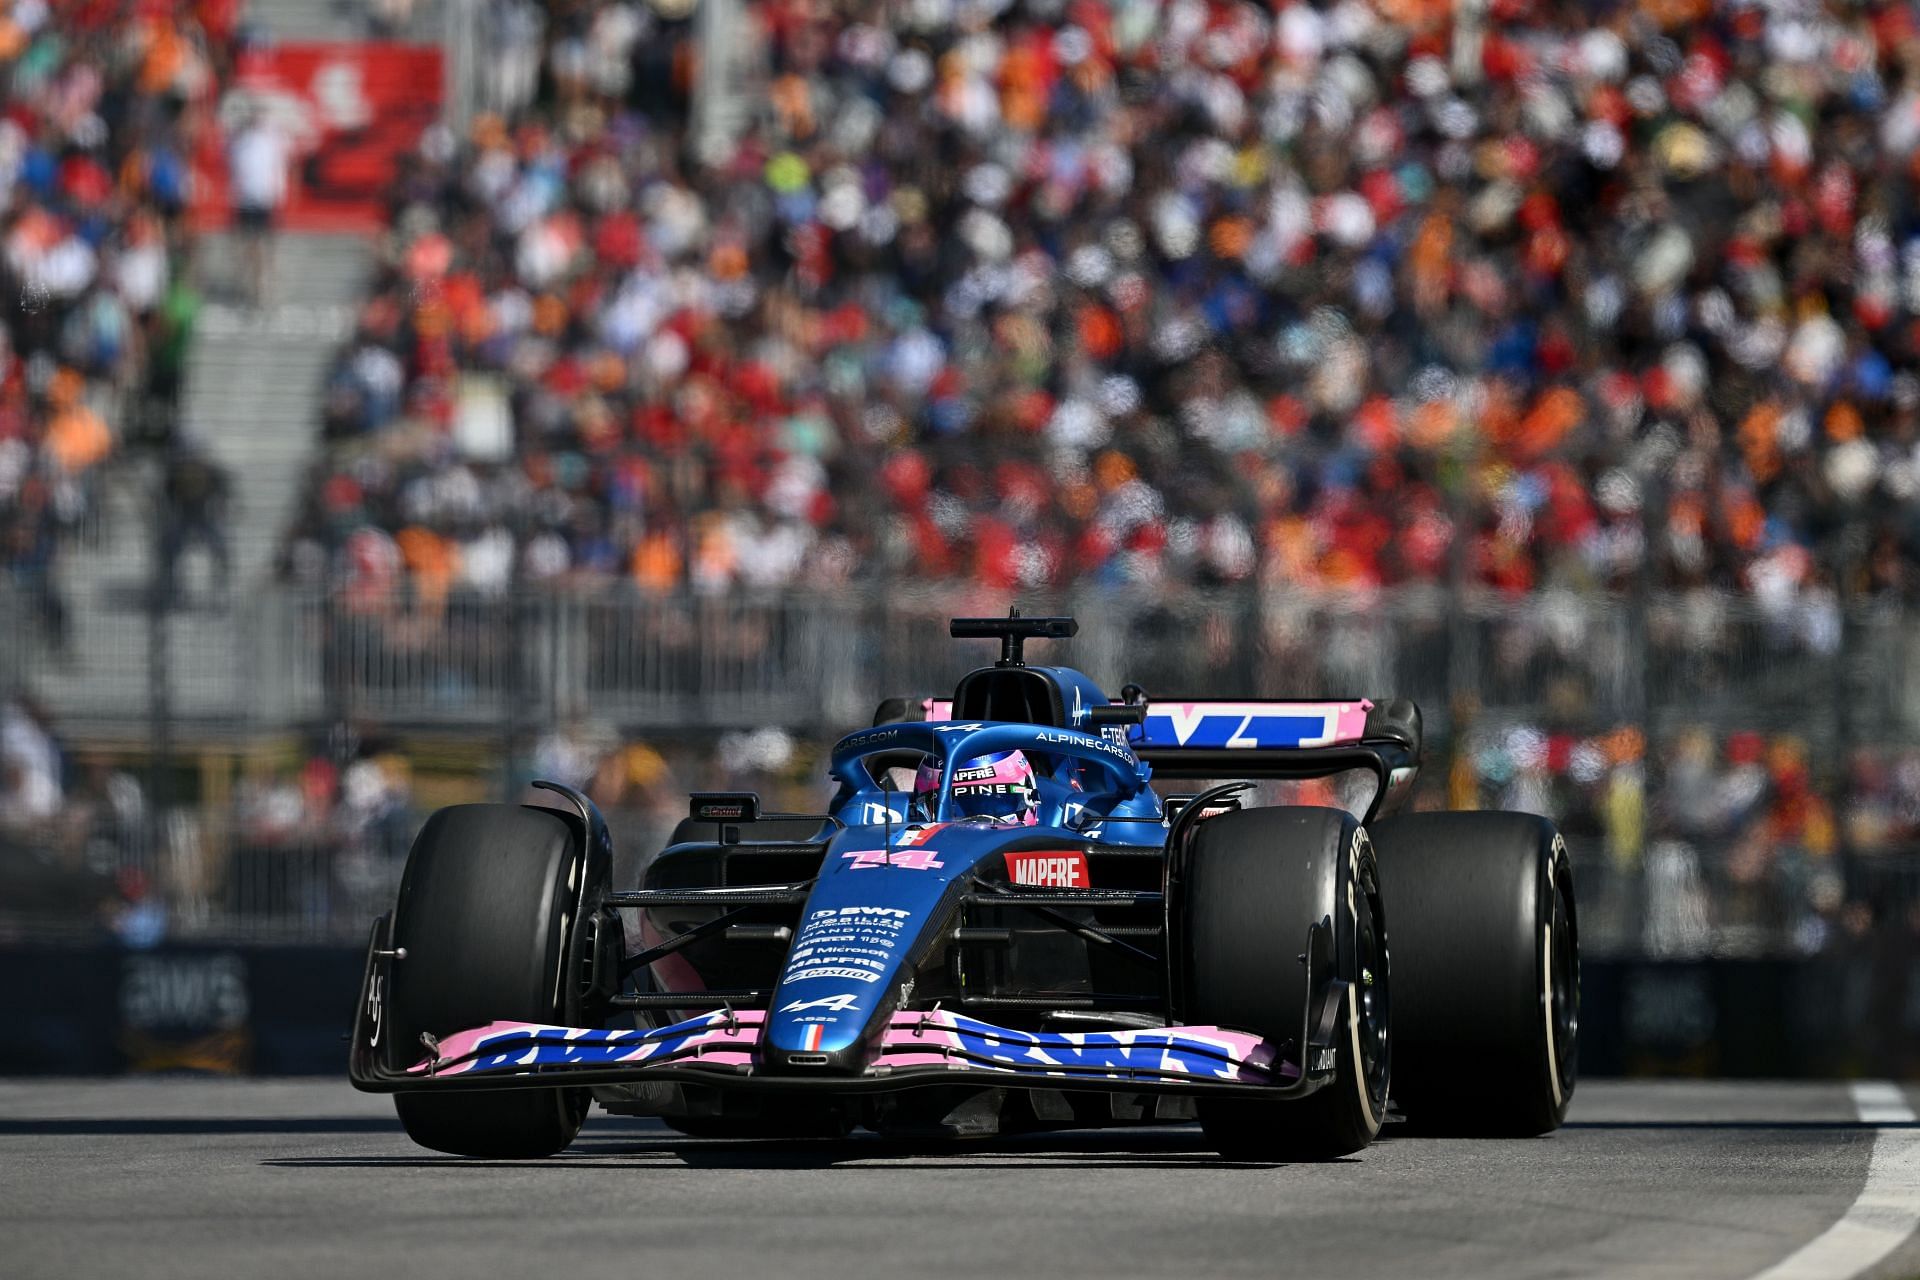 Alpine F1 driver Fernando Alonso in action during the 2022 F1 Canadian GP (Photo by Minas Panagiotakis/Getty Images)